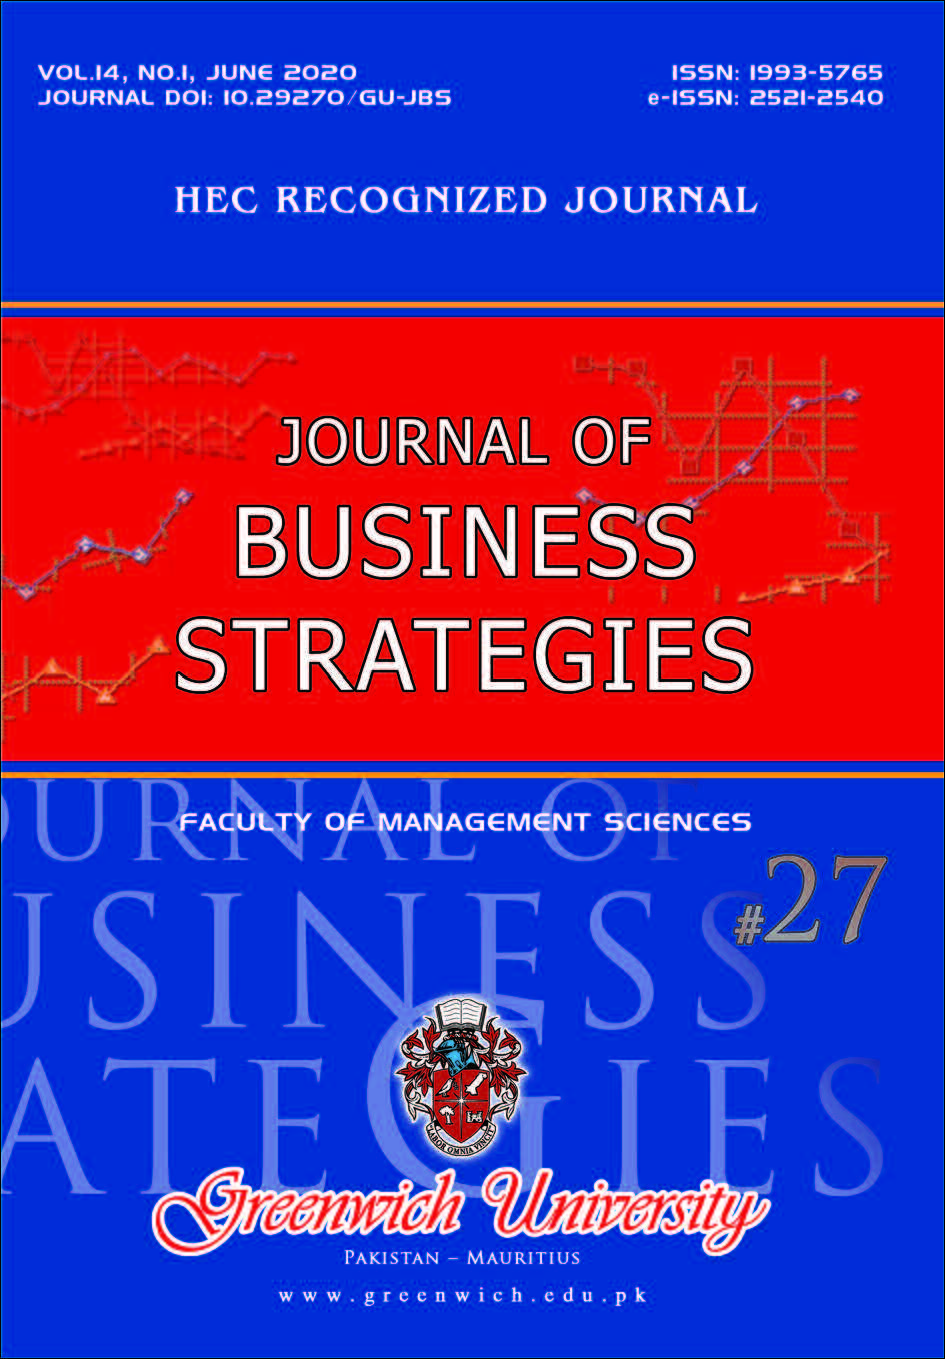 					View Vol. 14 No. 1 (2020): Journal of Business Strategies (June'20) Issue No. 27
				